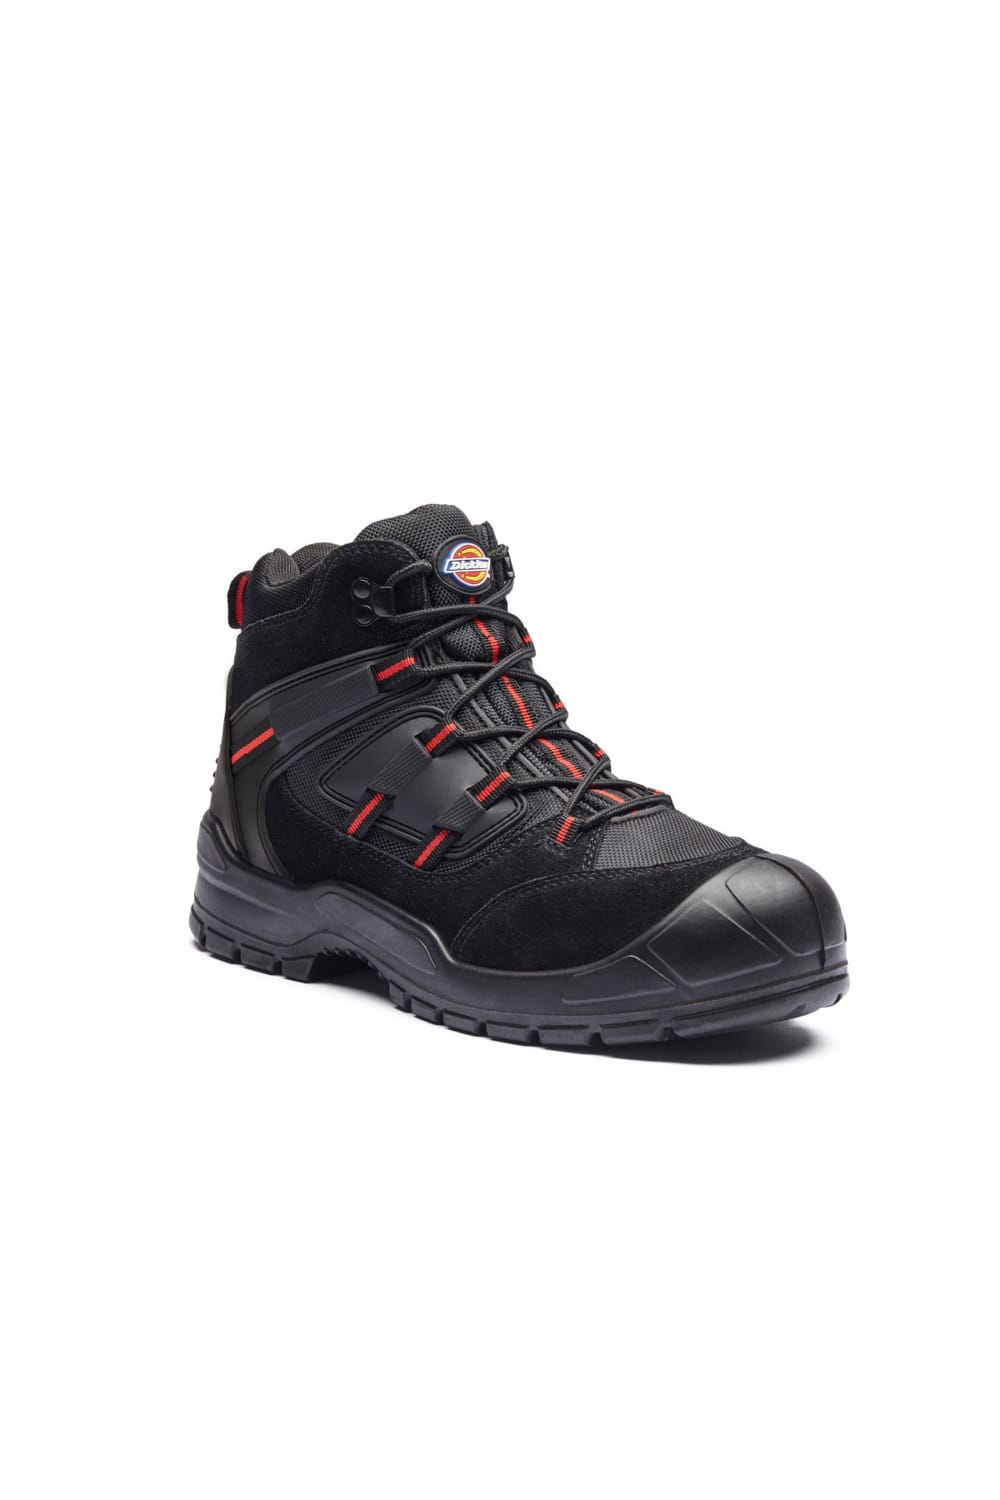 Mens Everyday Safety Boot - Jet Black/Red